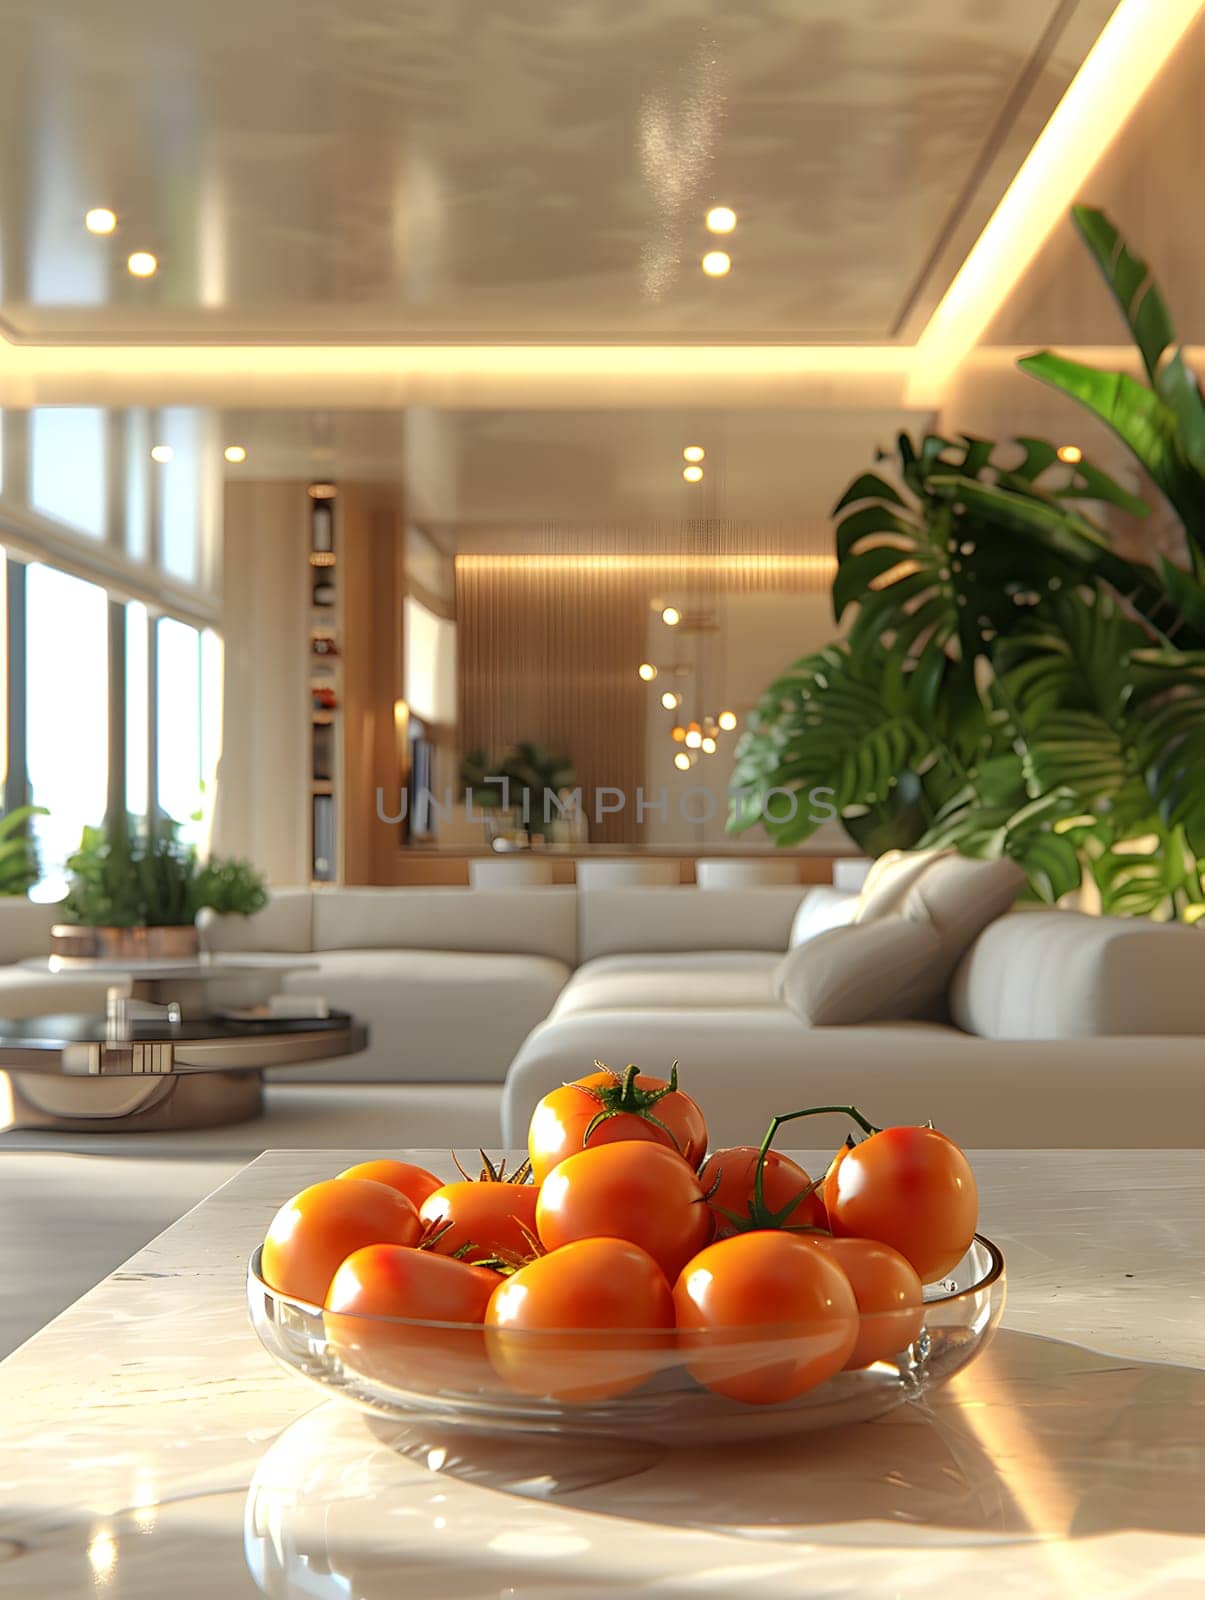 A bowl of oranges, a natural food source, decorates a wooden table in the living room, enhancing the room with its vibrant colors